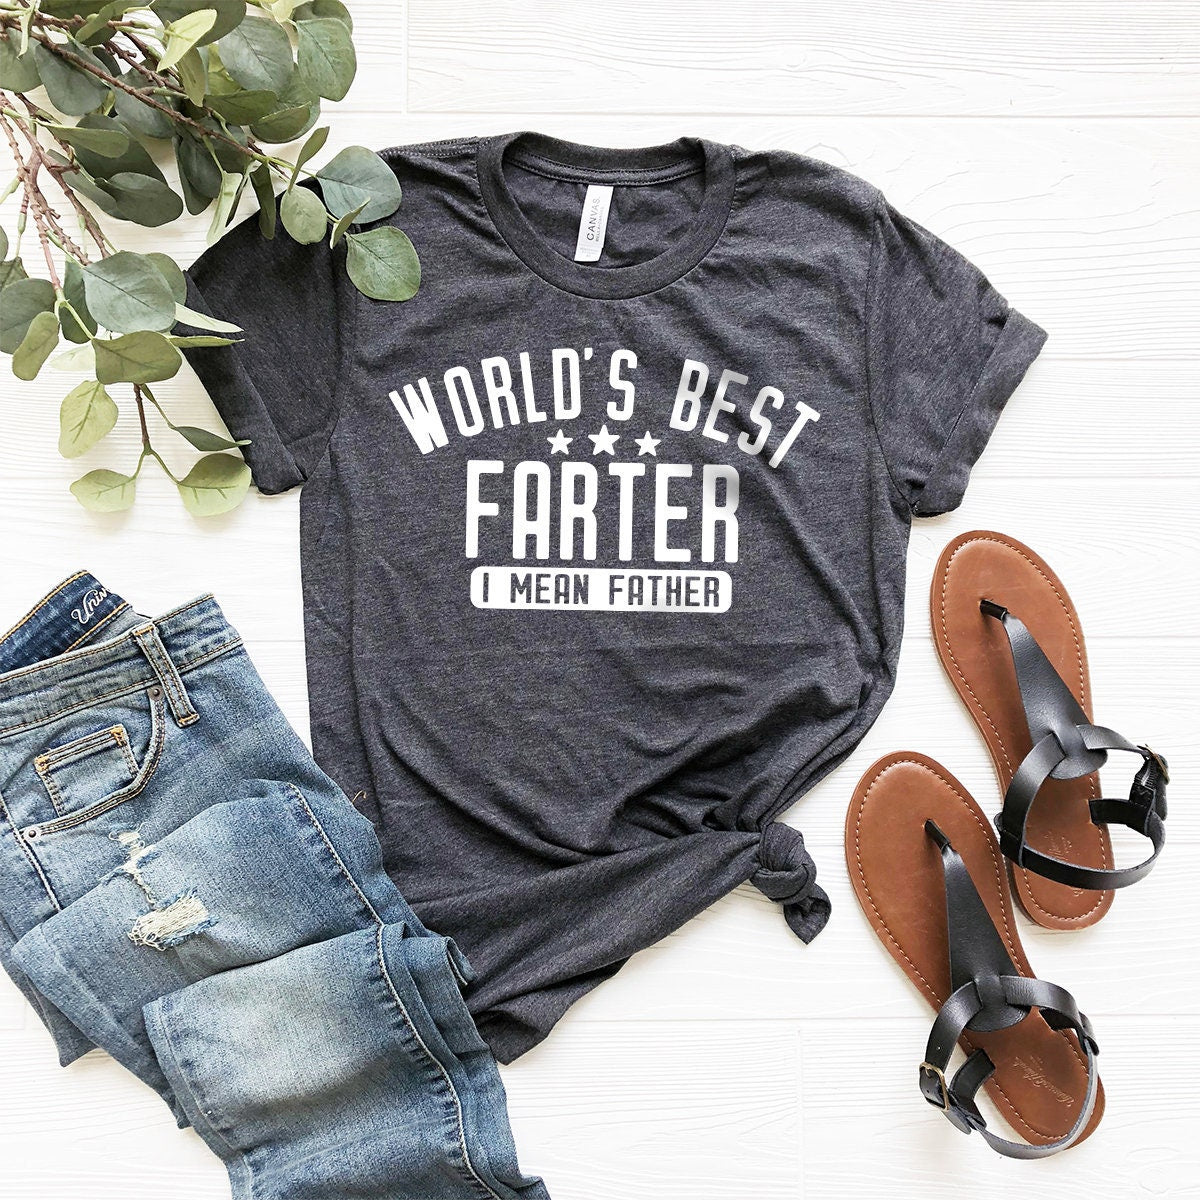 Funny Dad Shirt, Dad Birthday Gift, Dad Gift, Gift For Dad, Father Humor Shirt, Farter Father Tee, World's Best Farter I Mean Father Shirt, - Fastdeliverytees.com